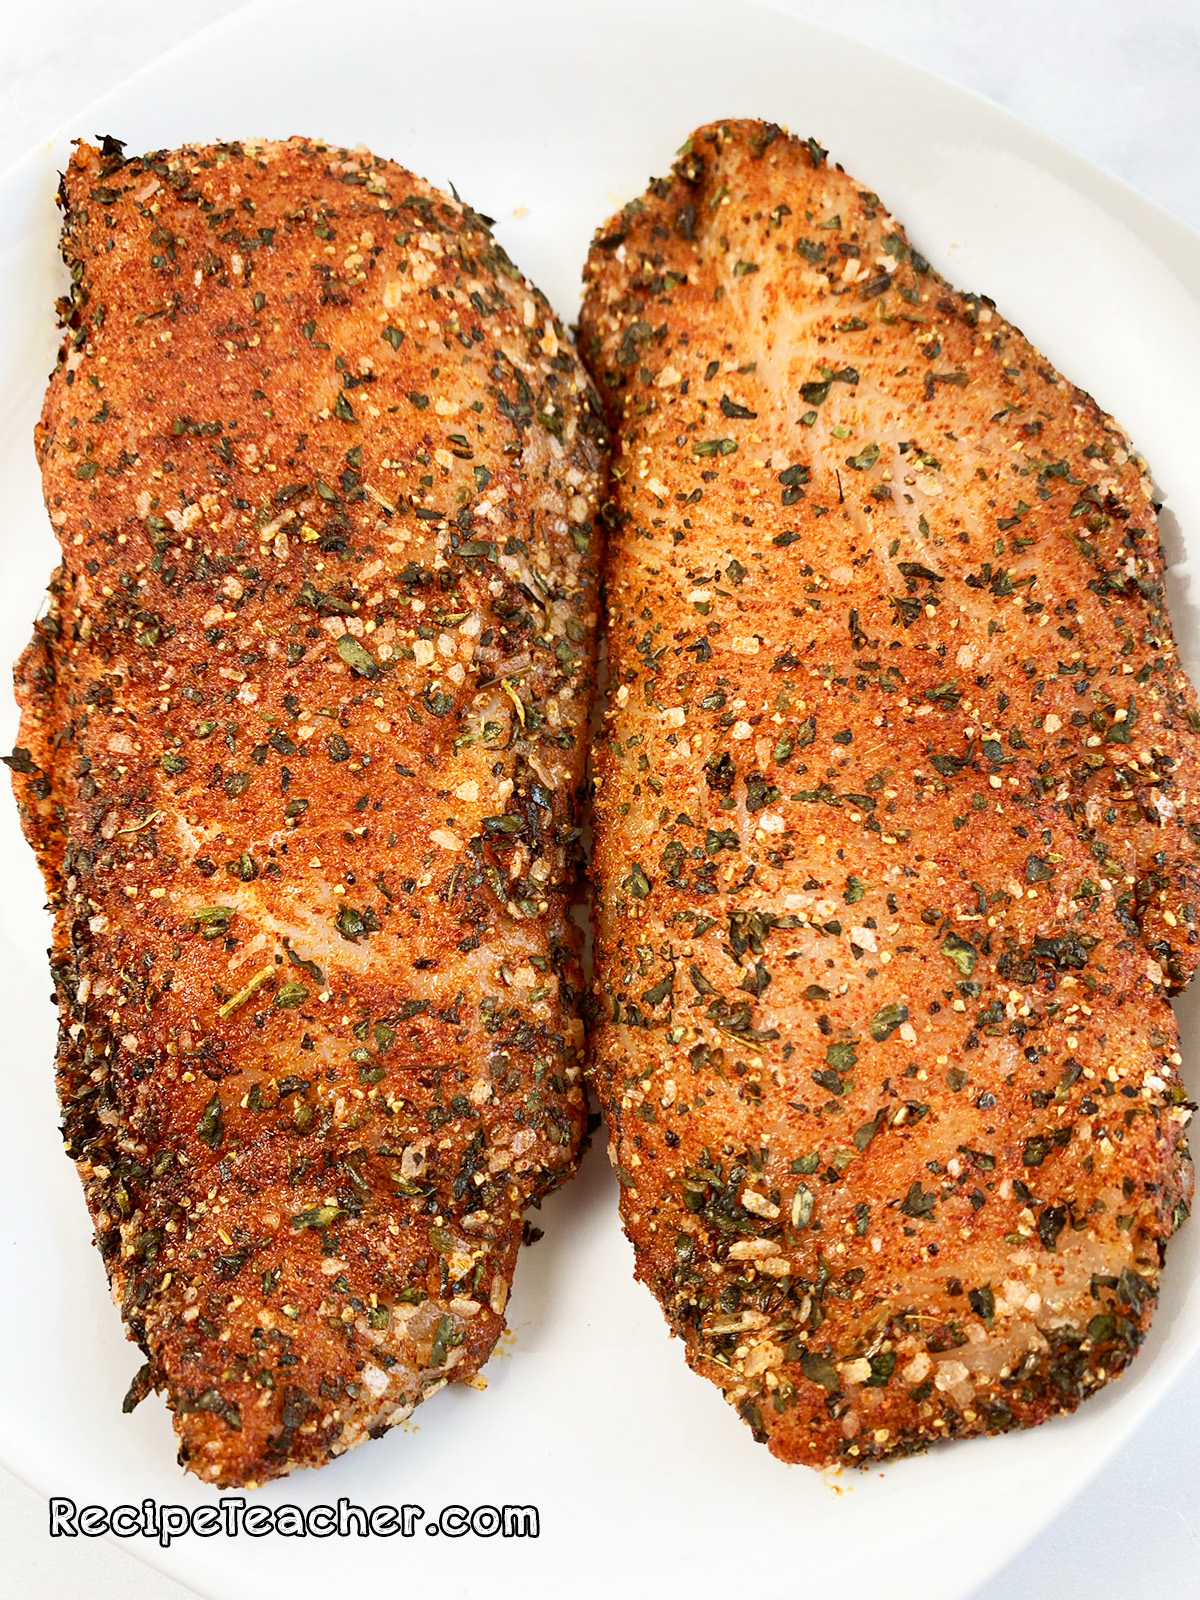 The seasoned chicken breast is ready to cook in the George Foreman Grill.